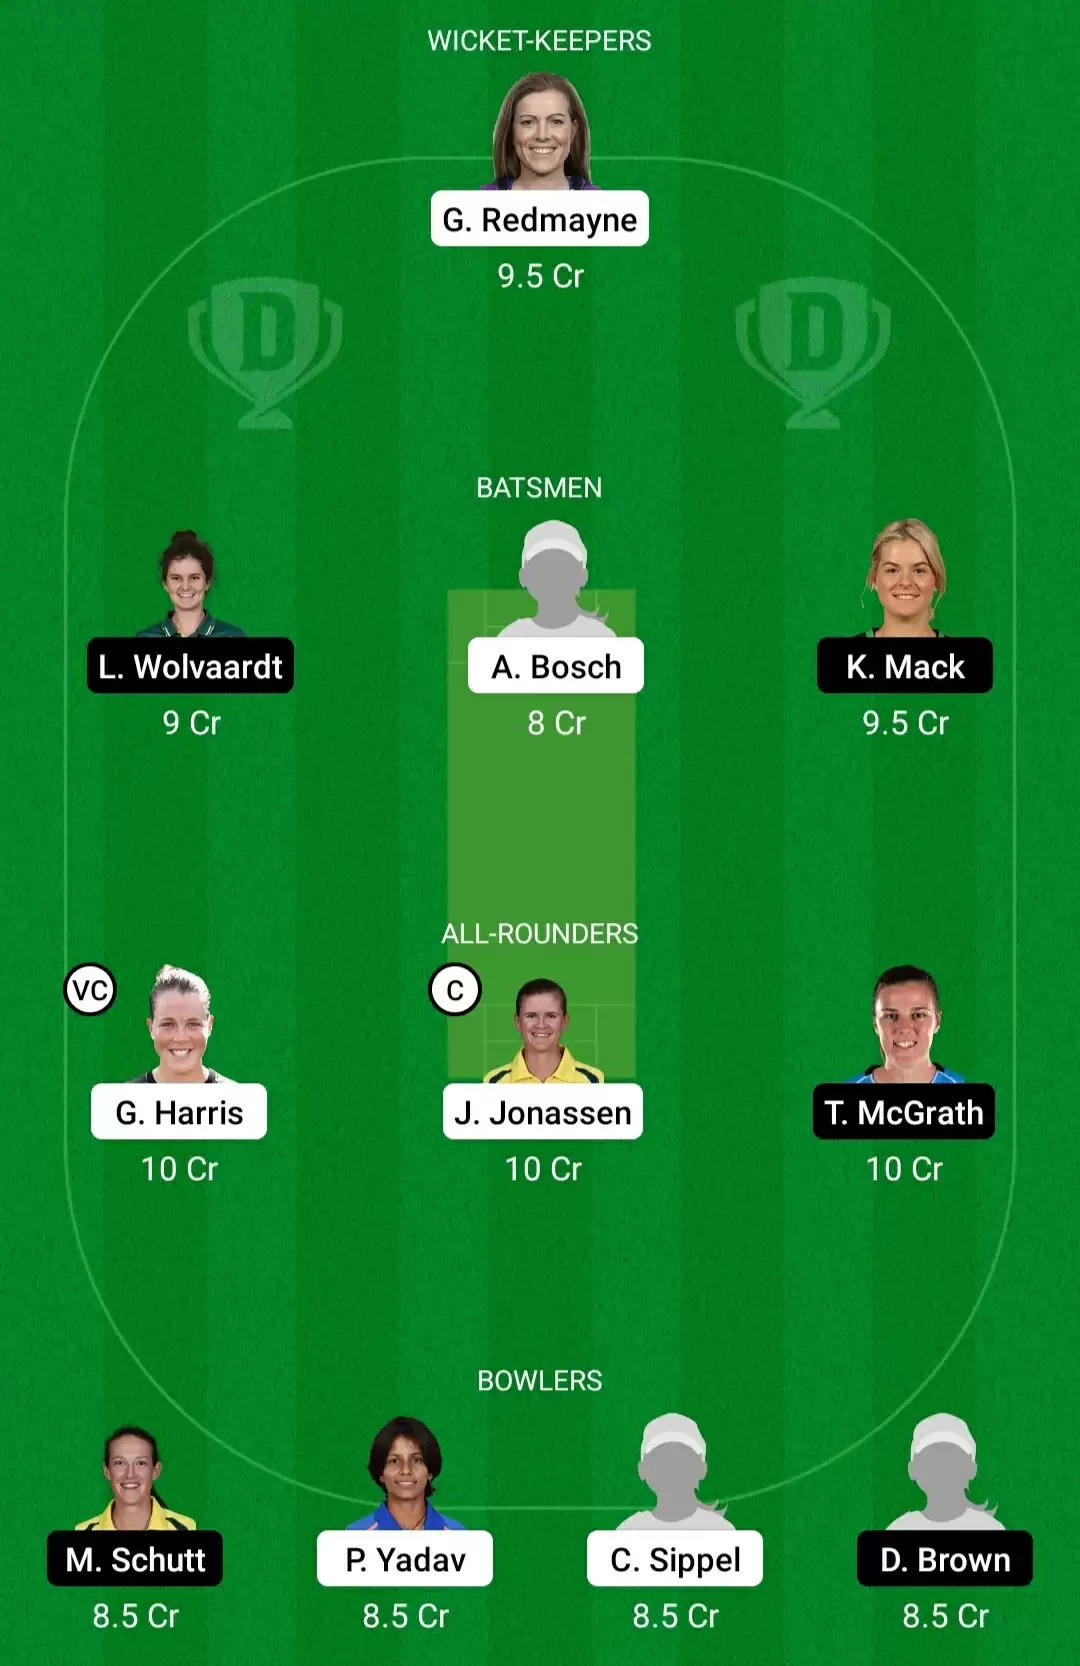 BH-W vs AS-W Dream11 Prediction for WBBL 2021 Eliminator: Playing XI, Fantasy Cricket Tips, Team, Weather Updates and Pitch Report